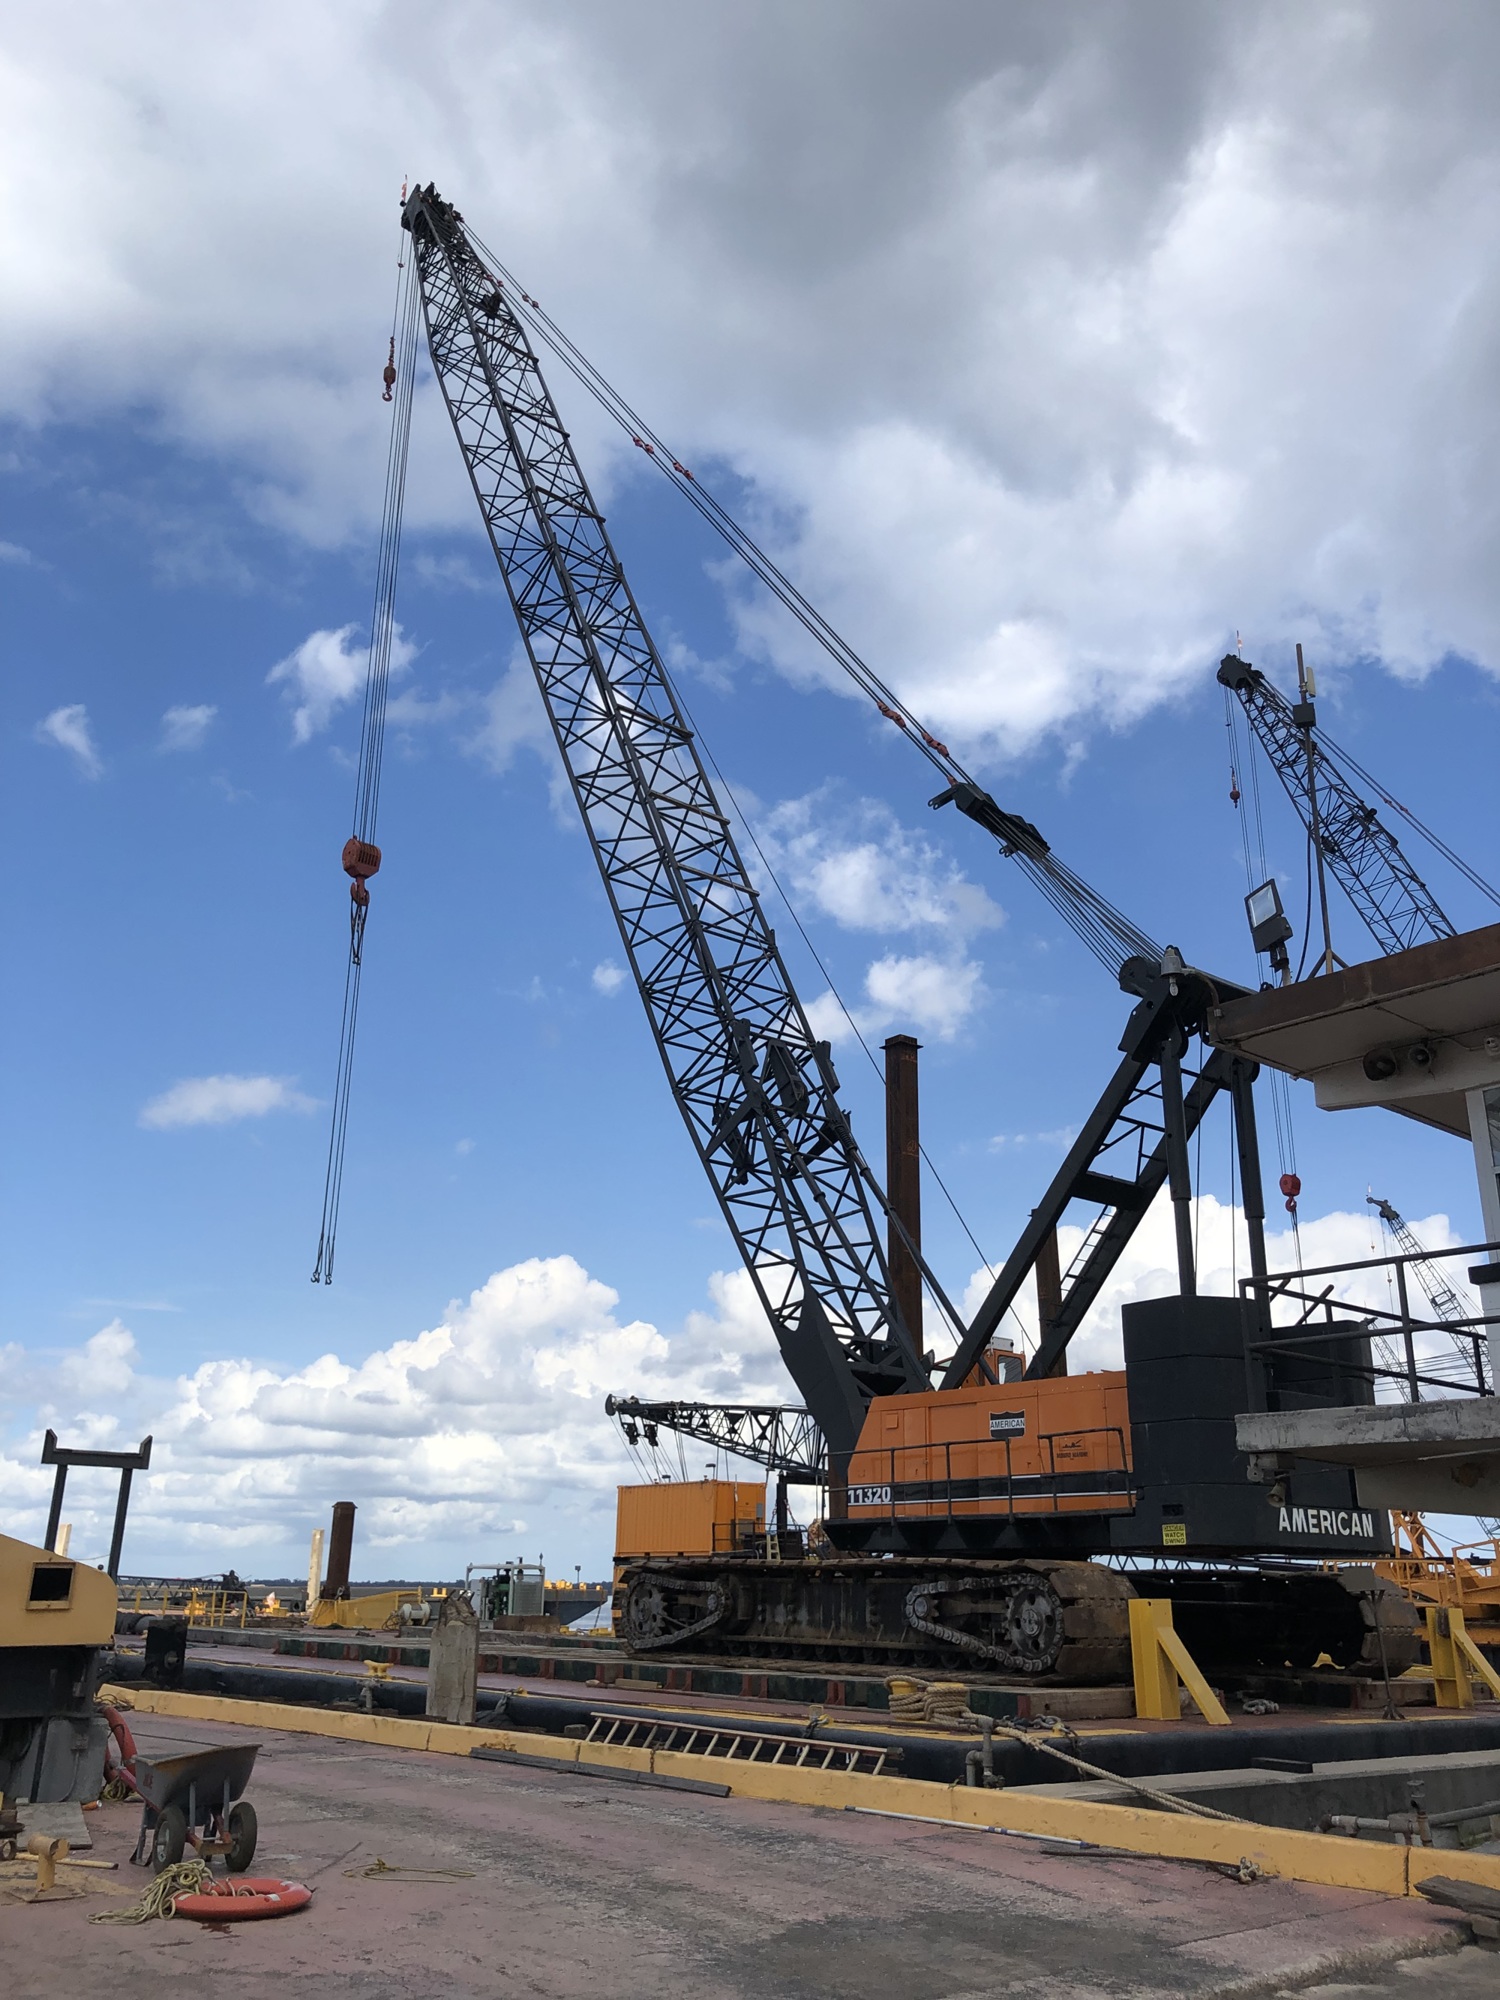 With a 450-ton lifting capacity, this crane is the largest in Mobro Marine’s fleet. The company’s new crane workshop was built to accommodate it.